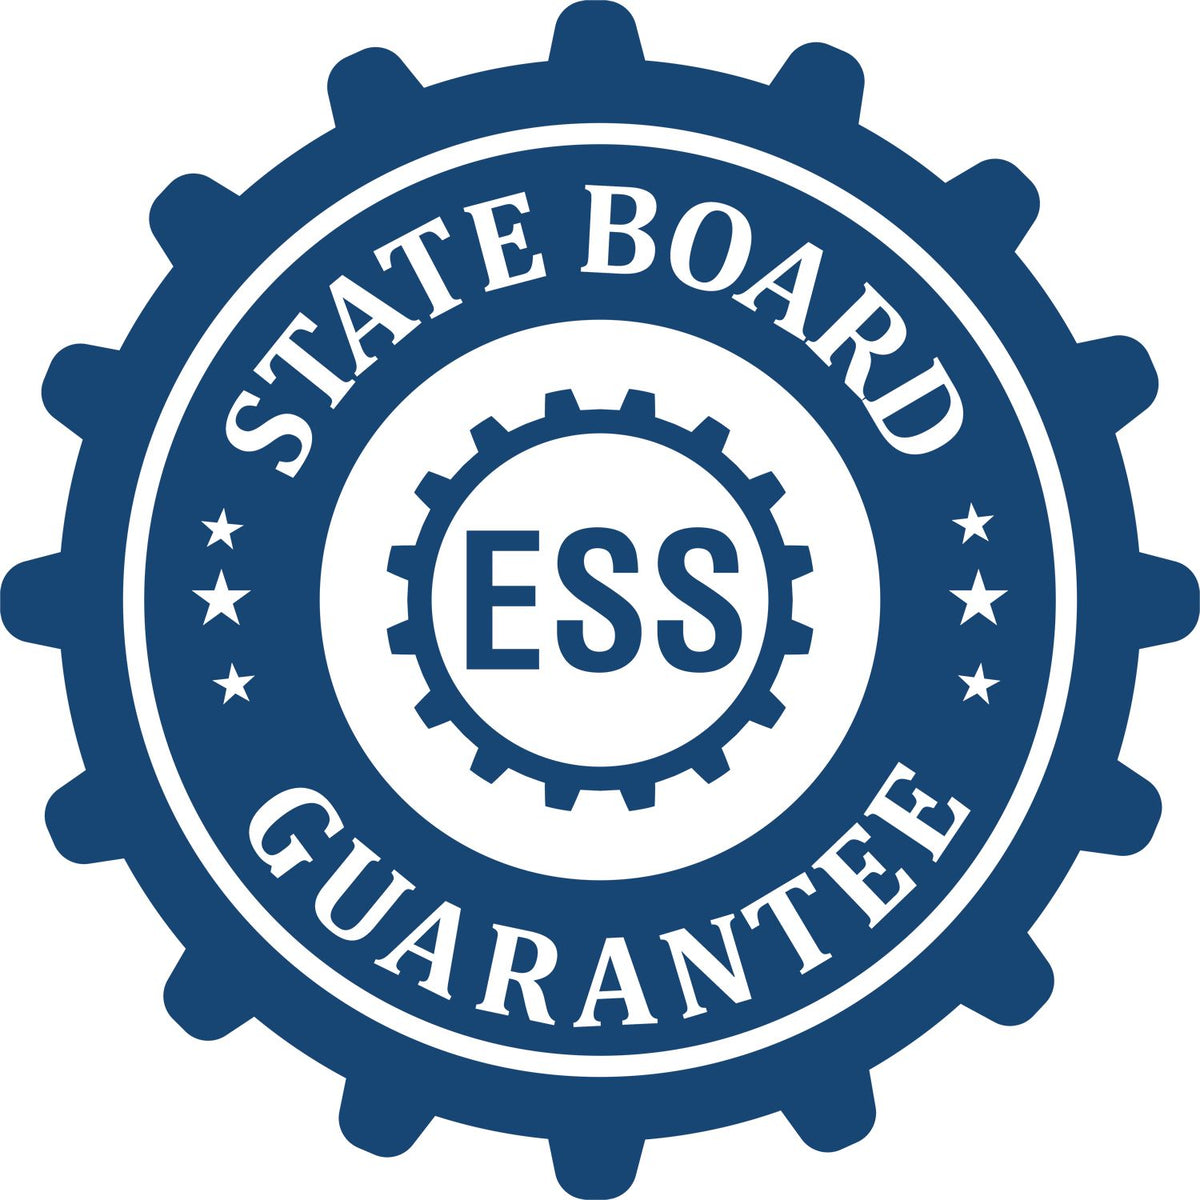 An emblem in a gear shape illustrating a state board guarantee for the Premium MaxLight Pre-Inked Wyoming Engineering Stamp product.